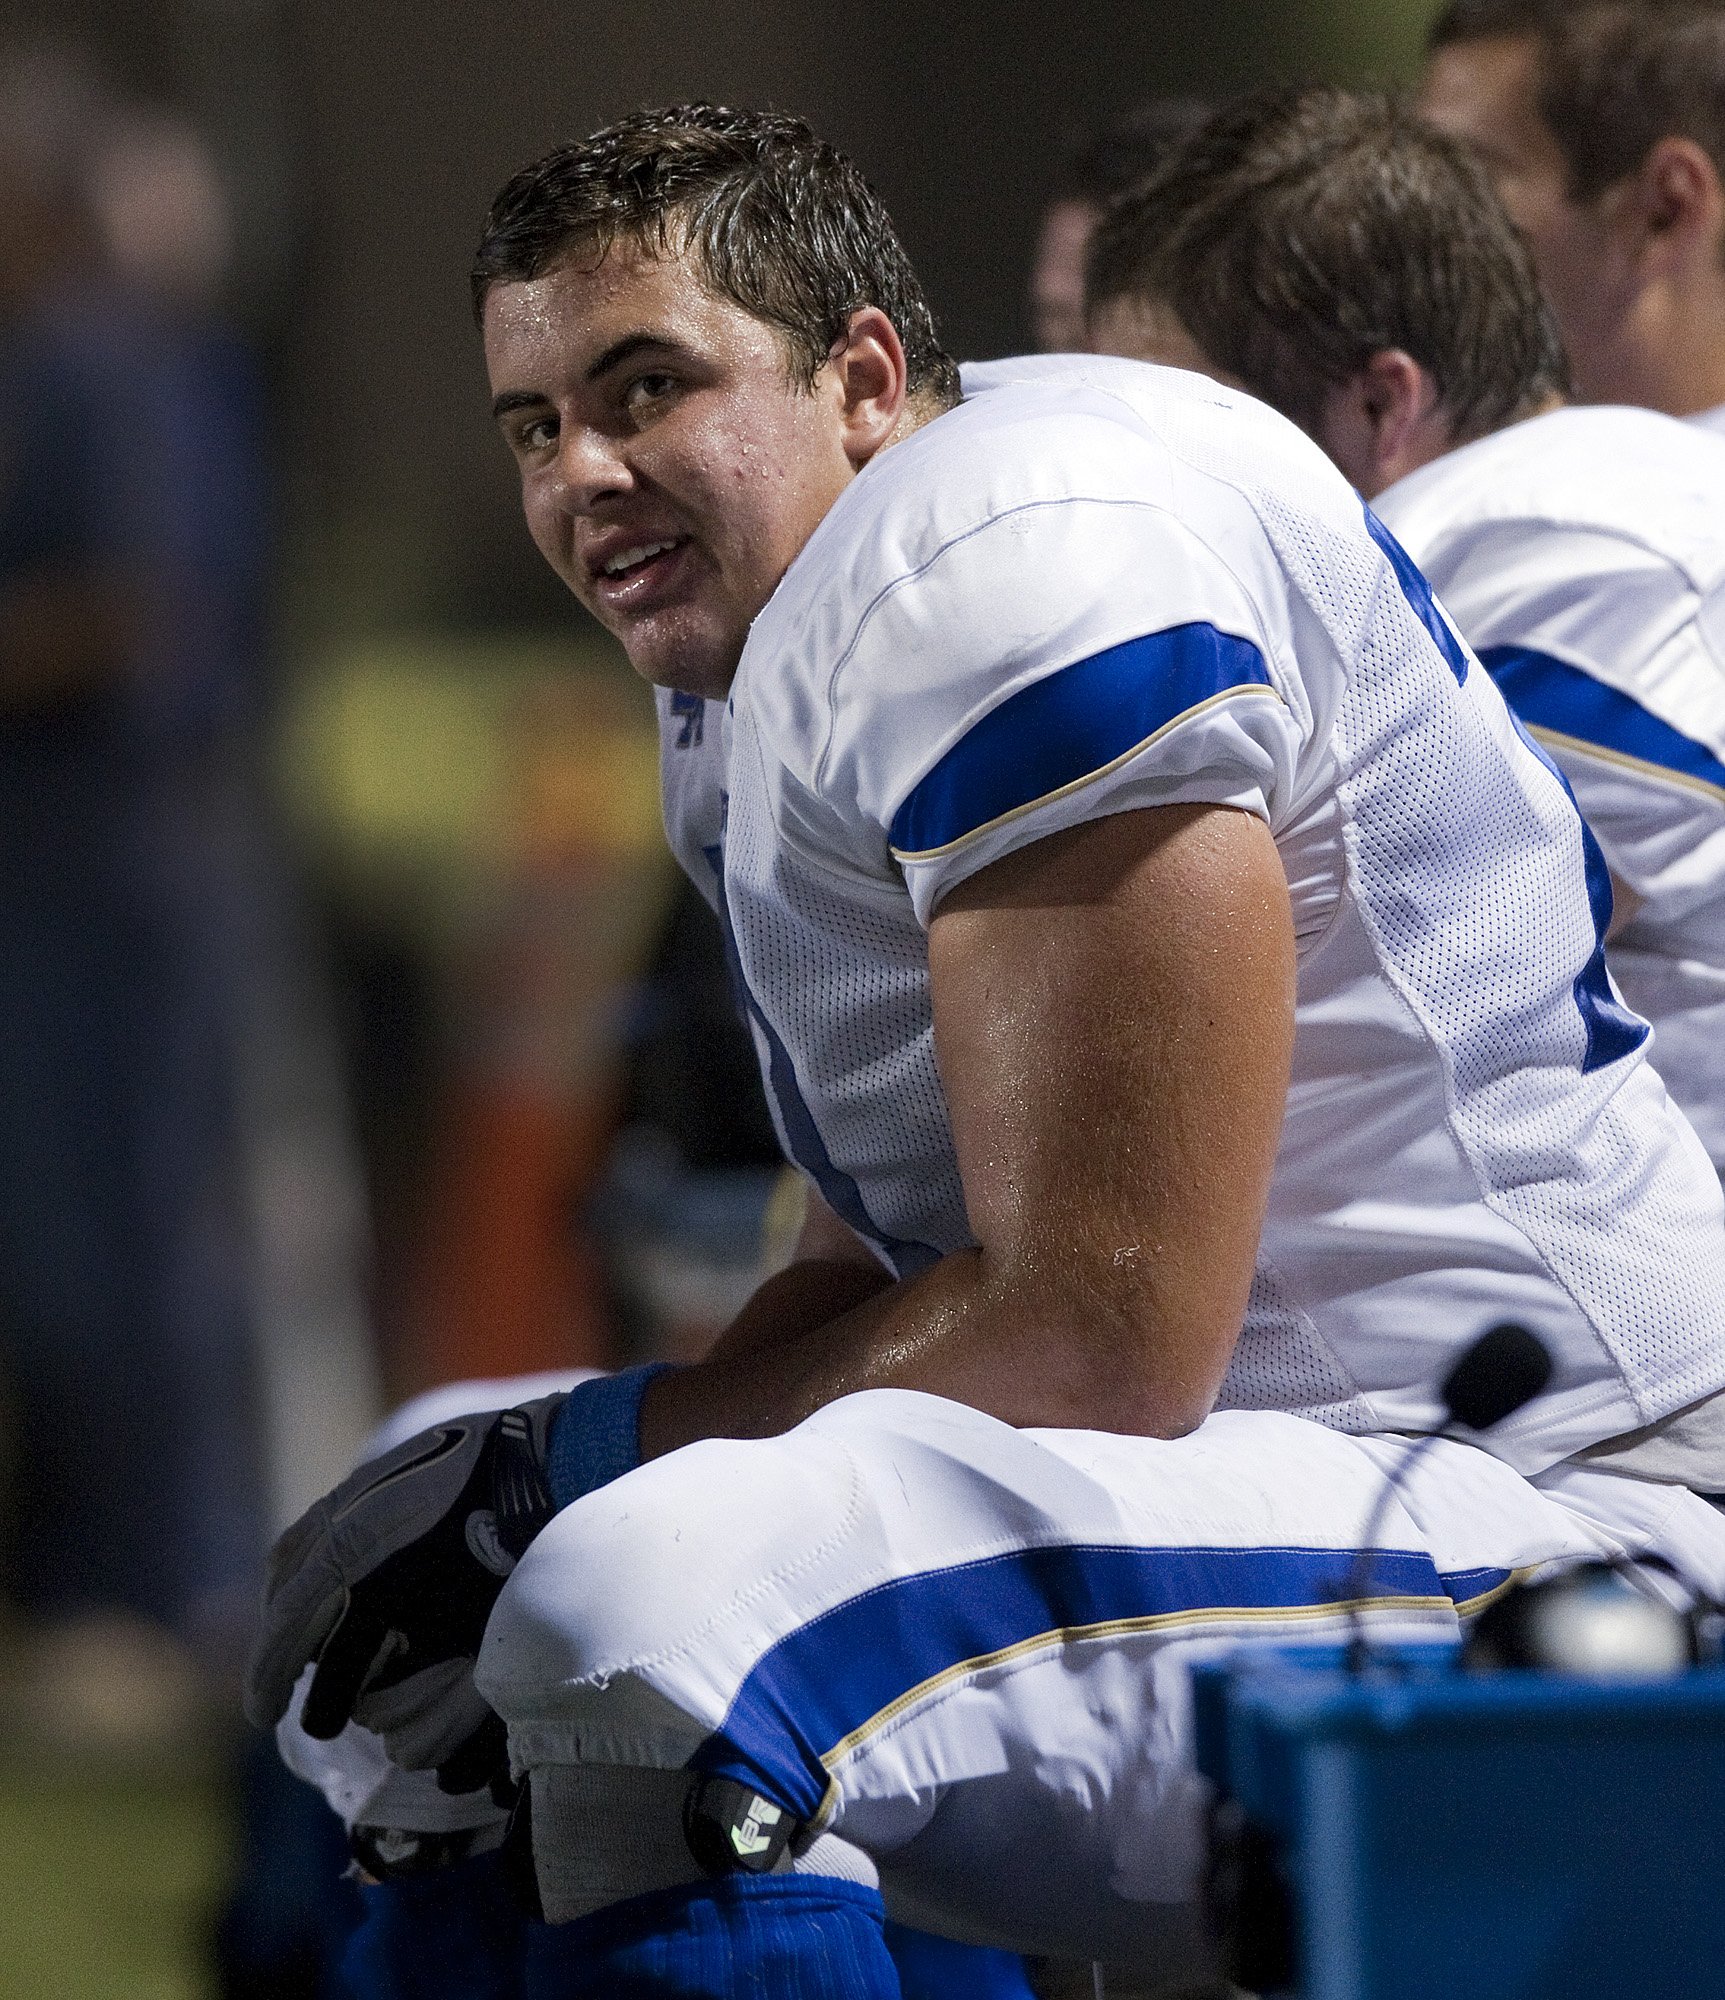 Santa Margarita lineman Max Tuerk takes a breather during the game against Trabuco Hills in on September 15, 2011. | Source: Getty Images.